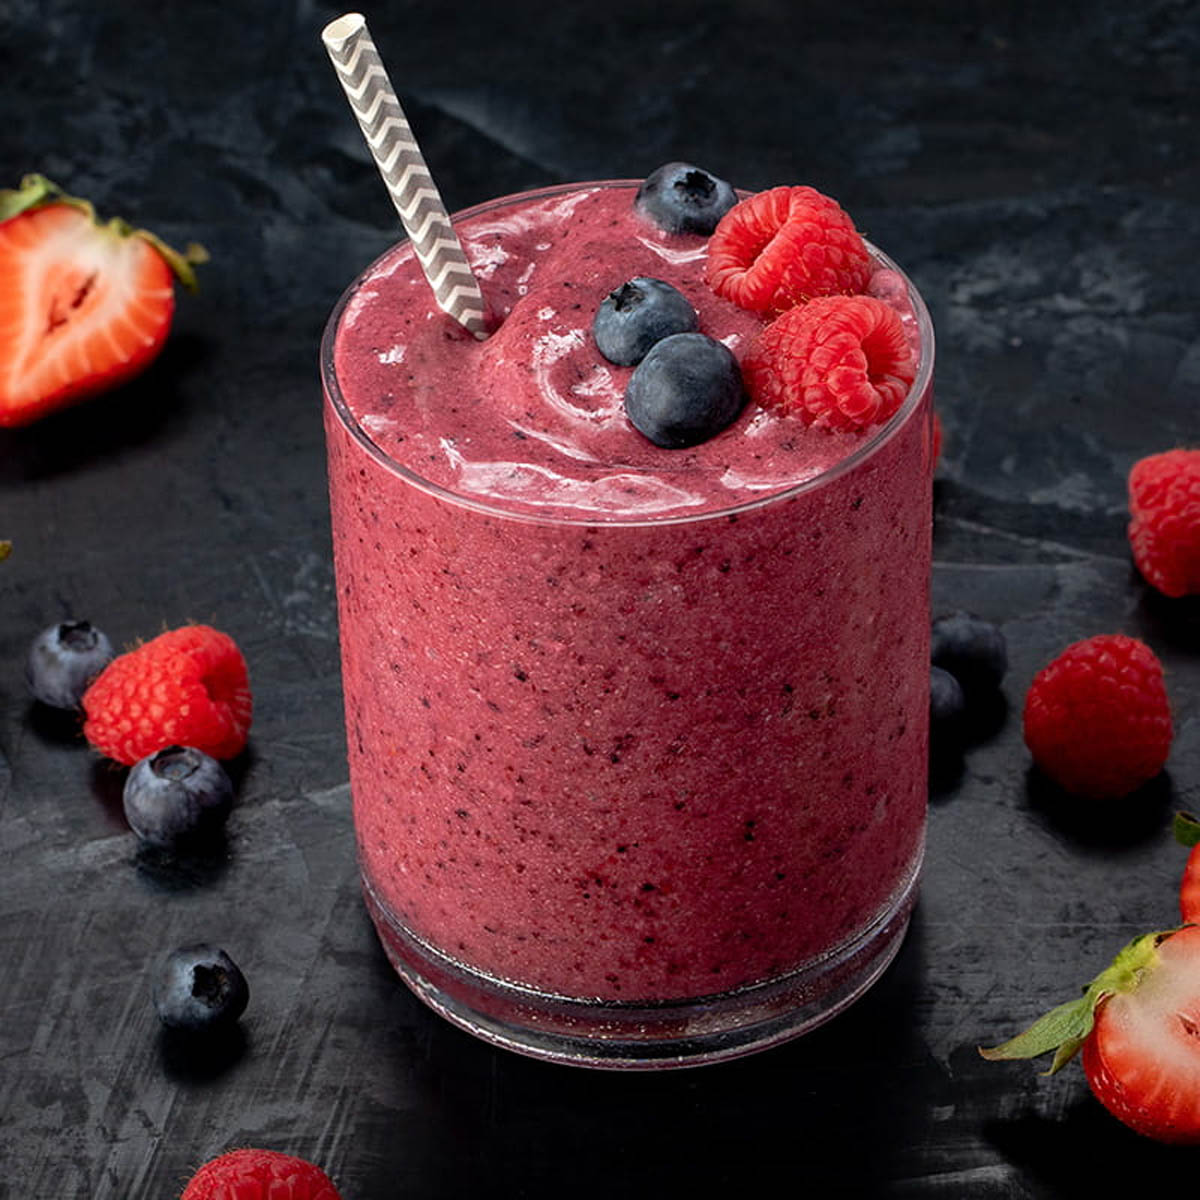 The Real Food Academy Miami's monster bash smoothie recipe.